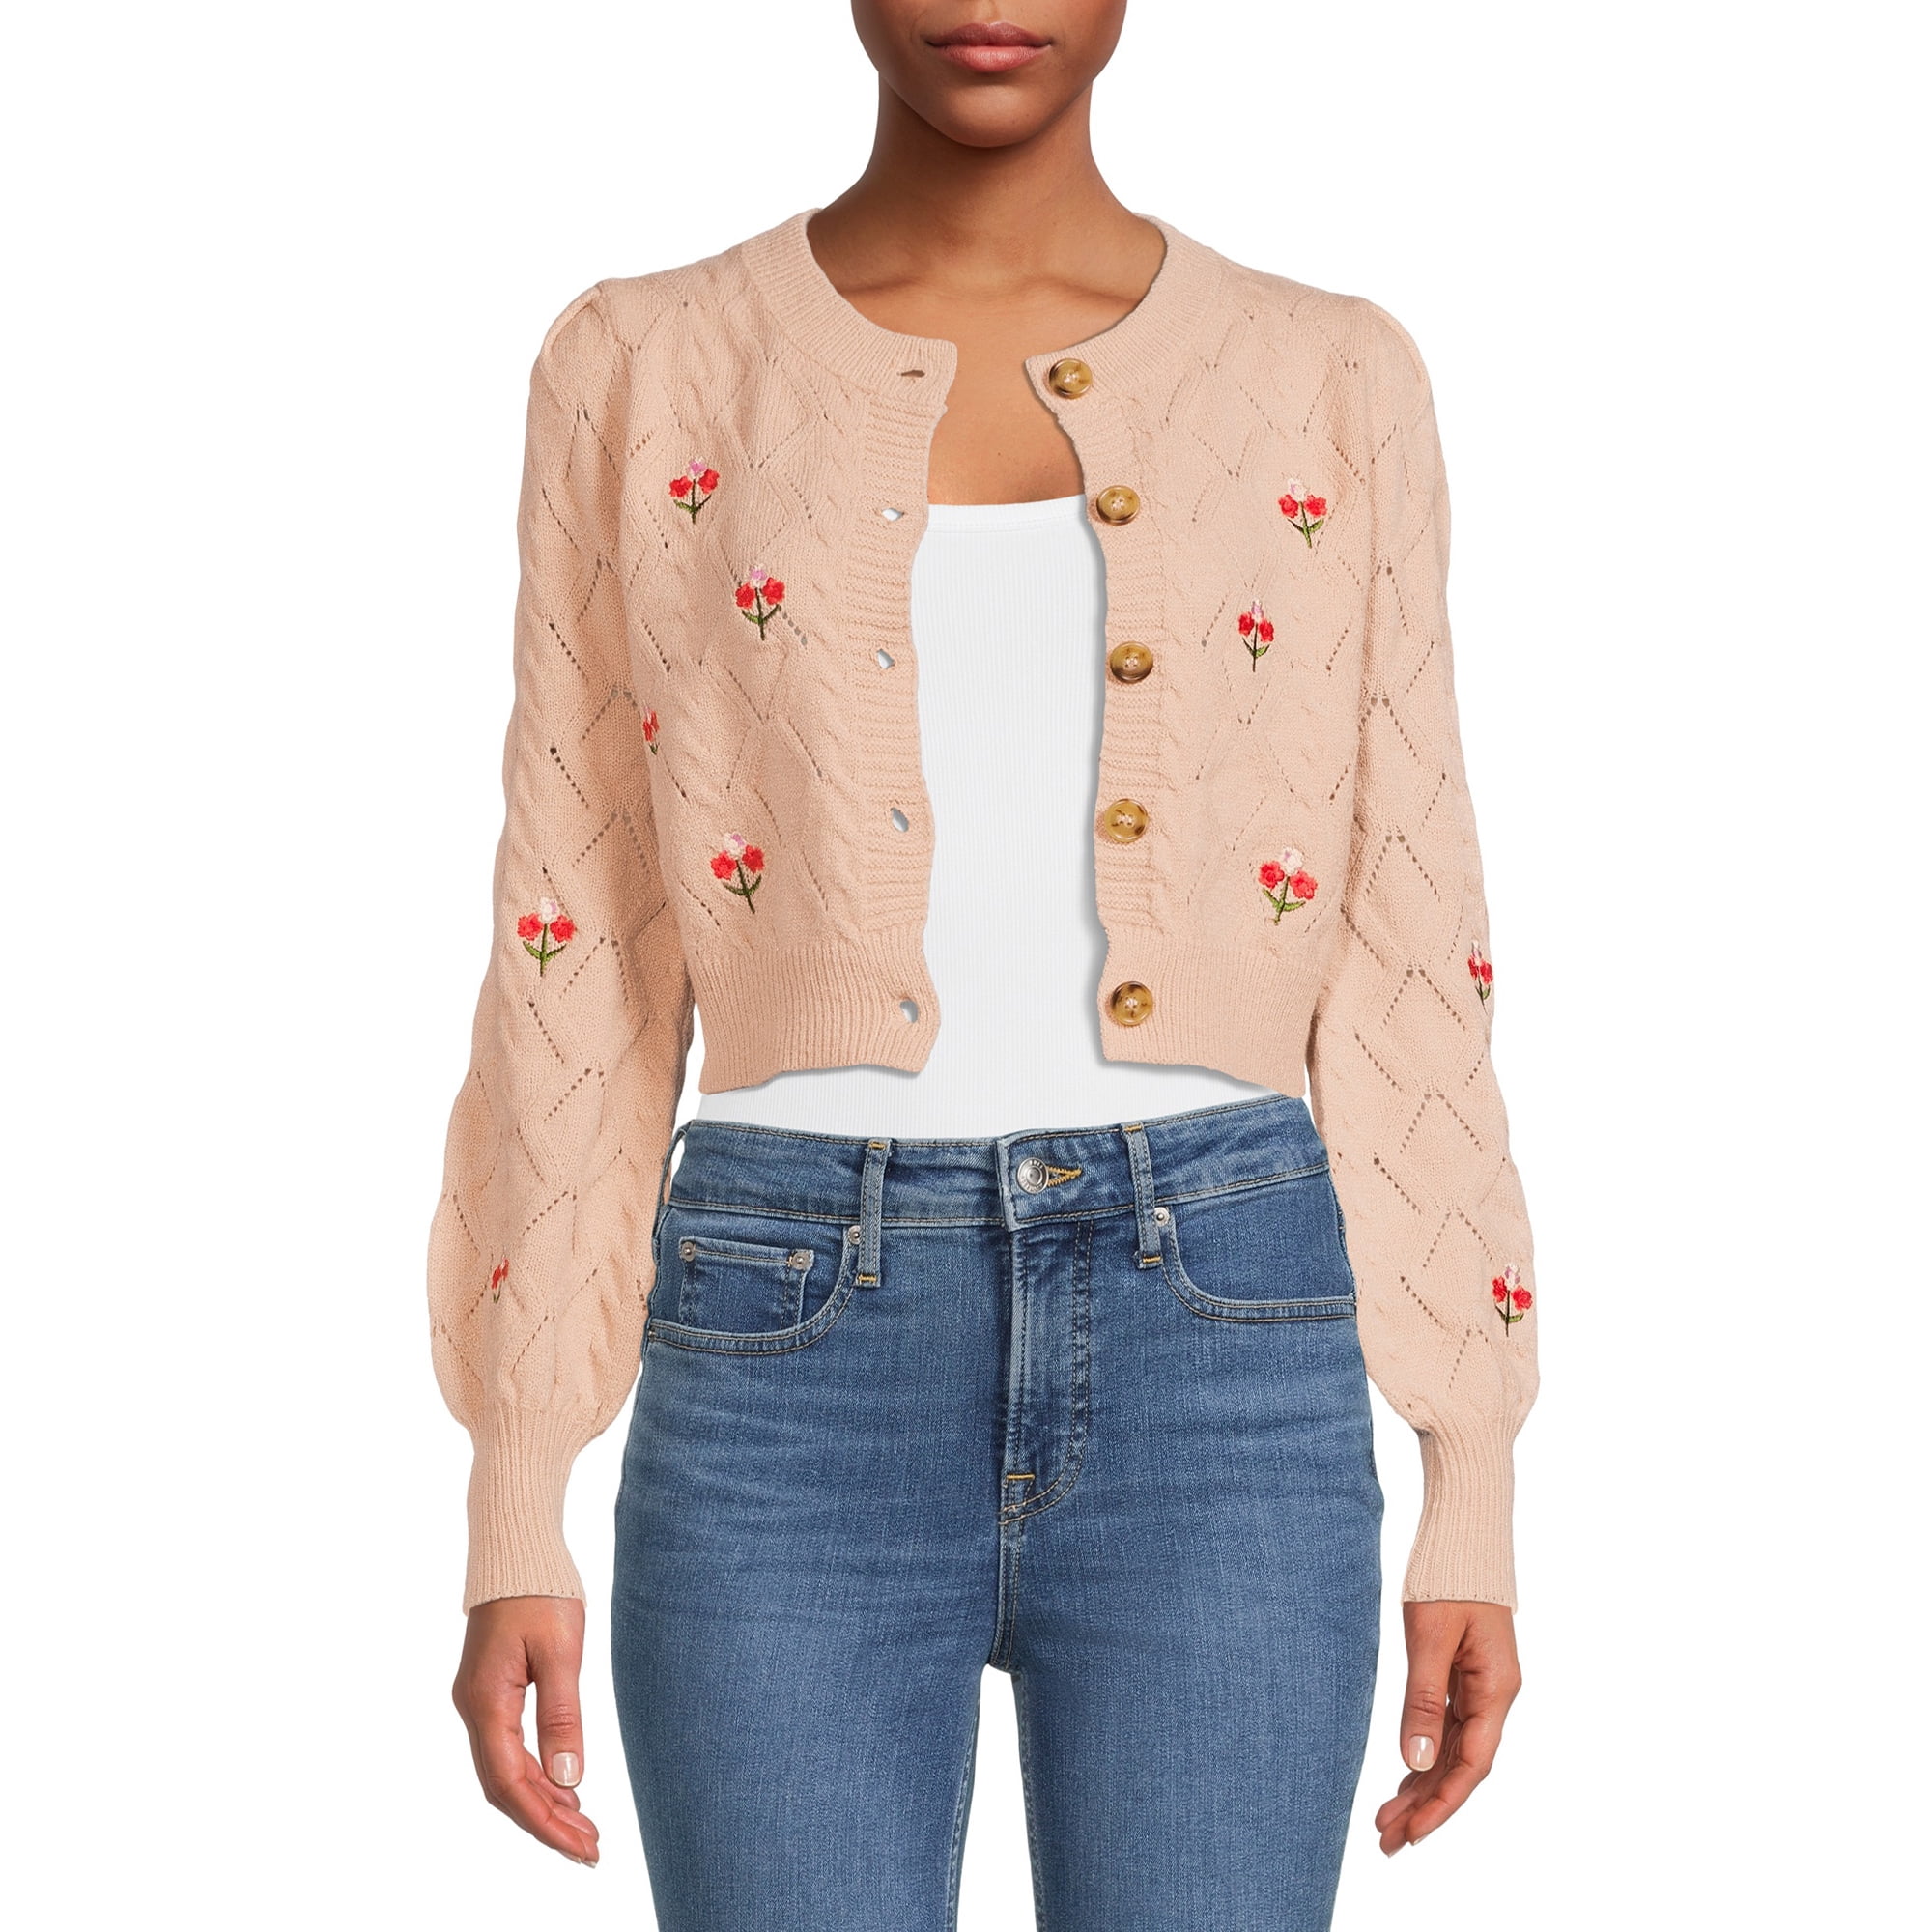 Dreamers by Debut Womens Floral Stitched Cardigan Long Sleeve Sweater 